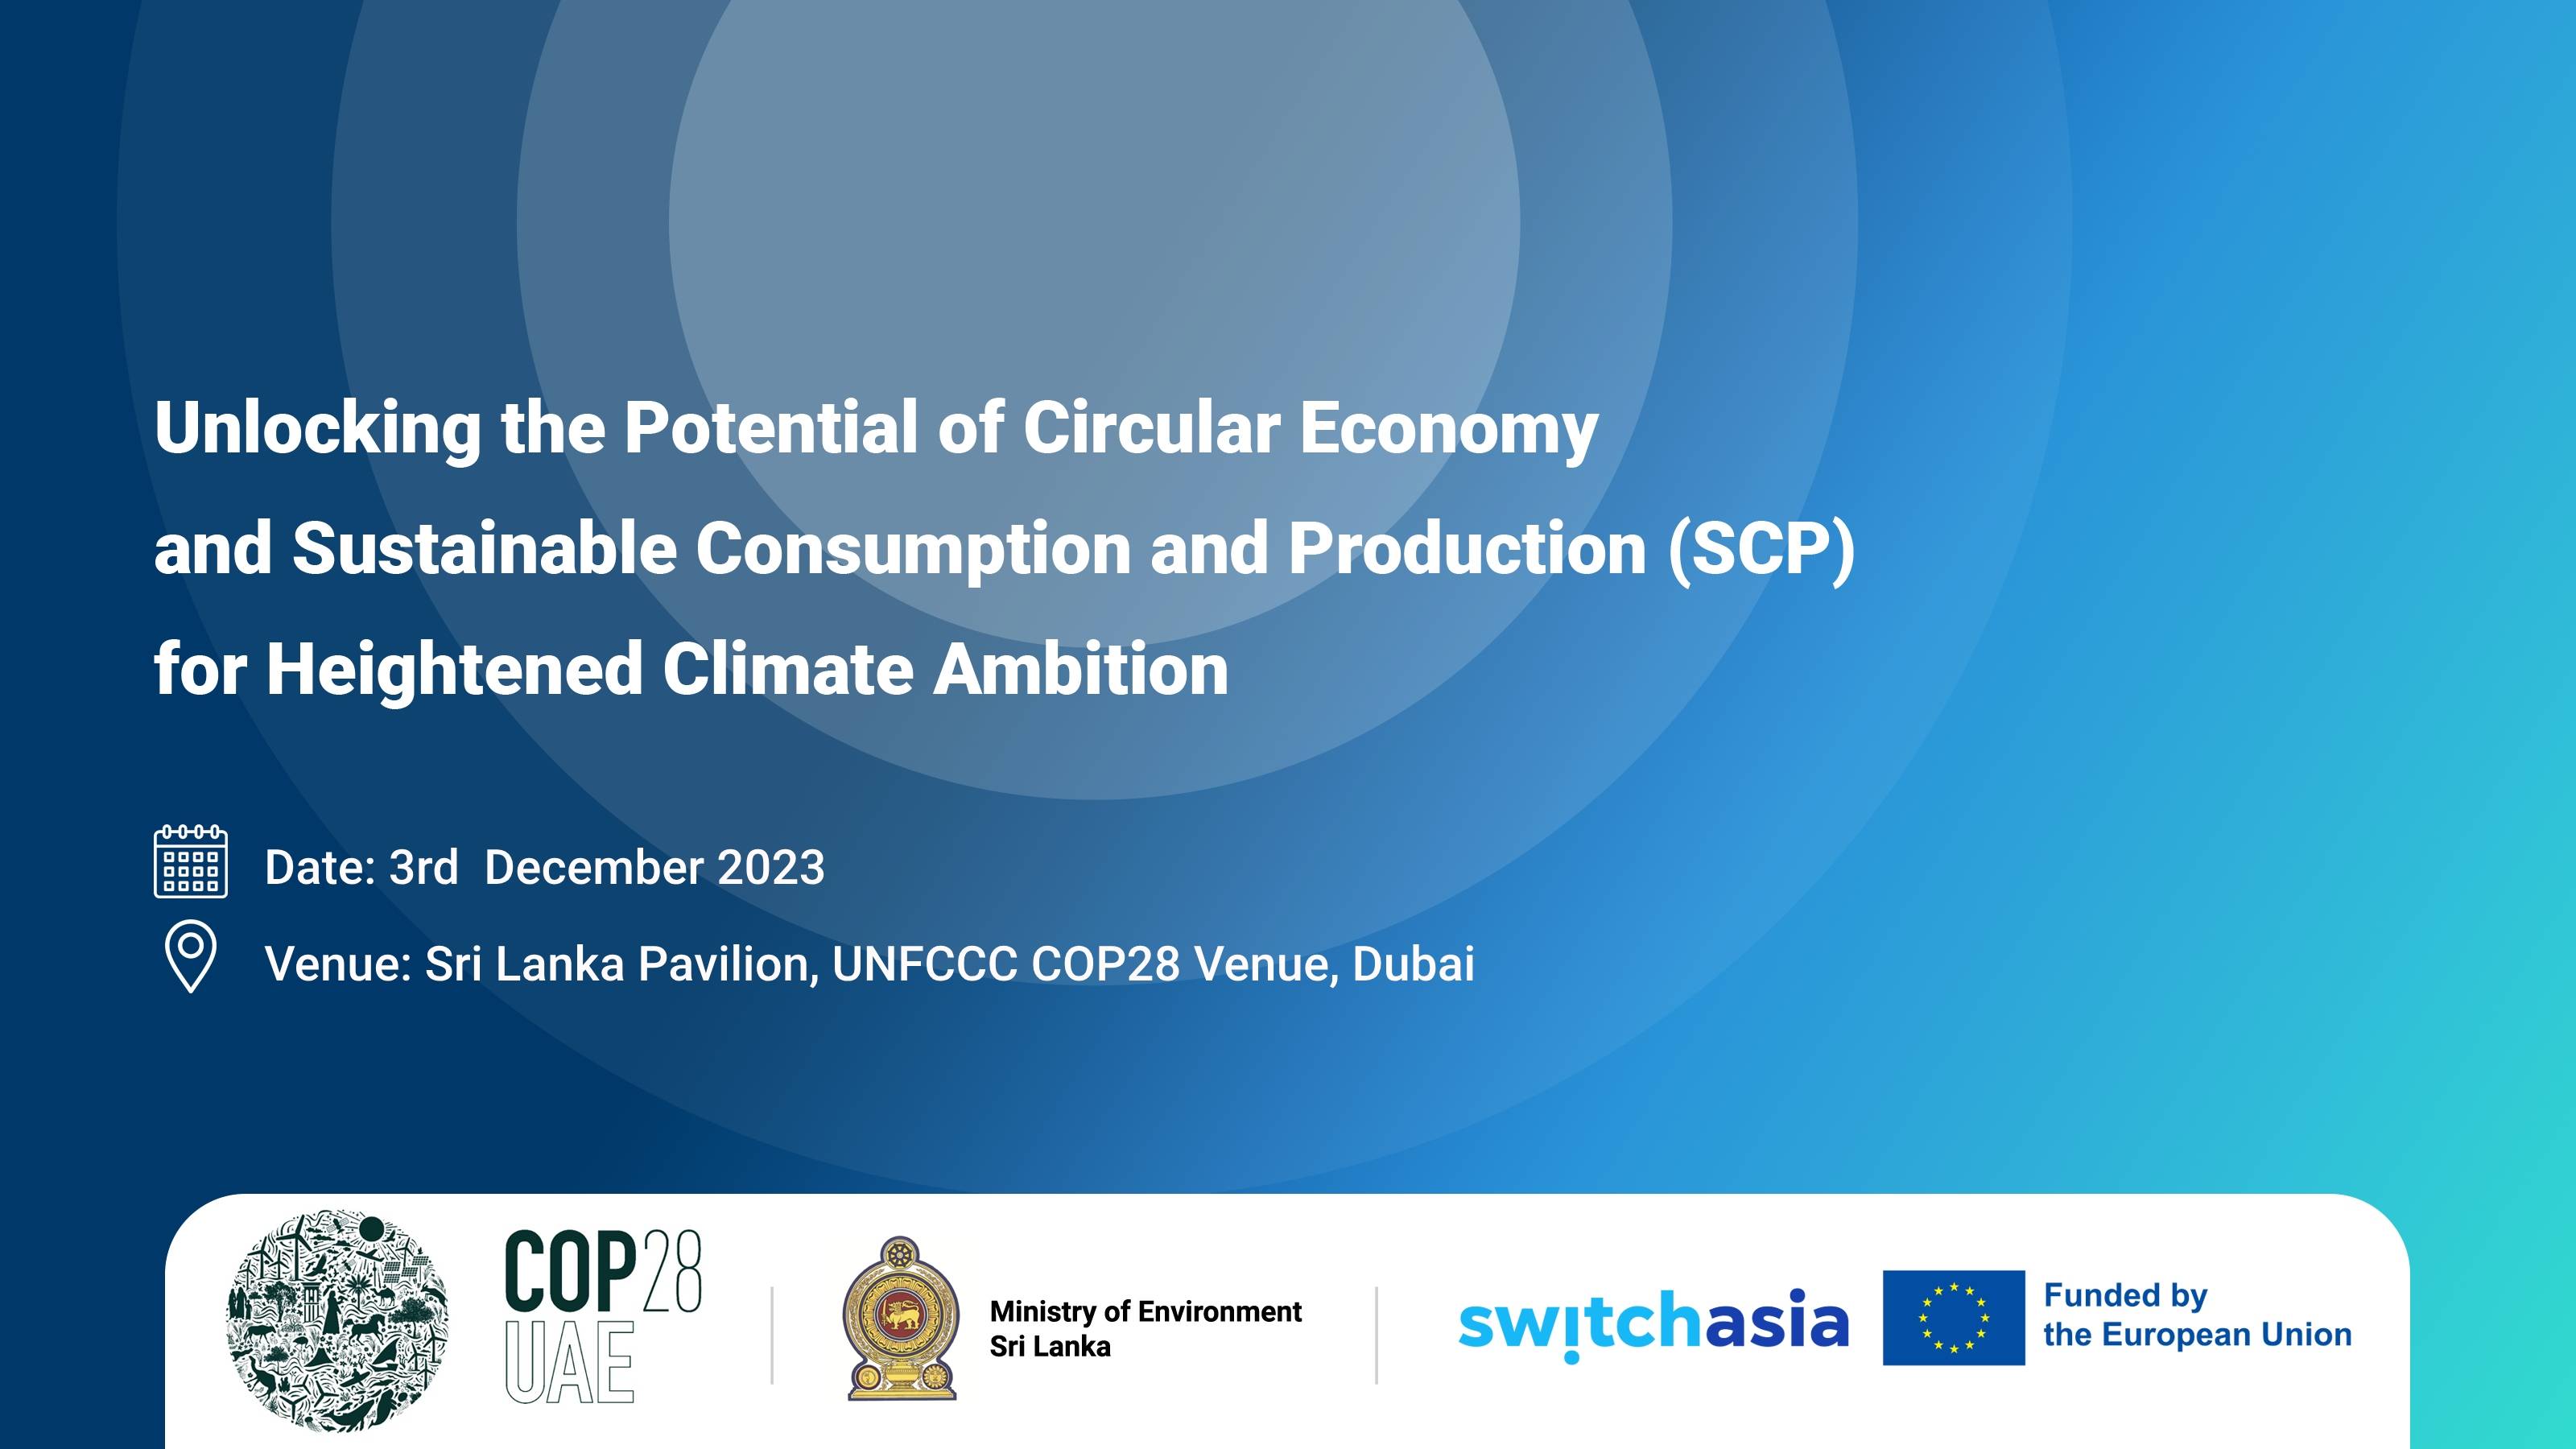 COP28: Unlocking the Potential of Circular Economy and Sustainable Consumption and Production (SCP) for Heightened Climate Ambition in Sri Lanka